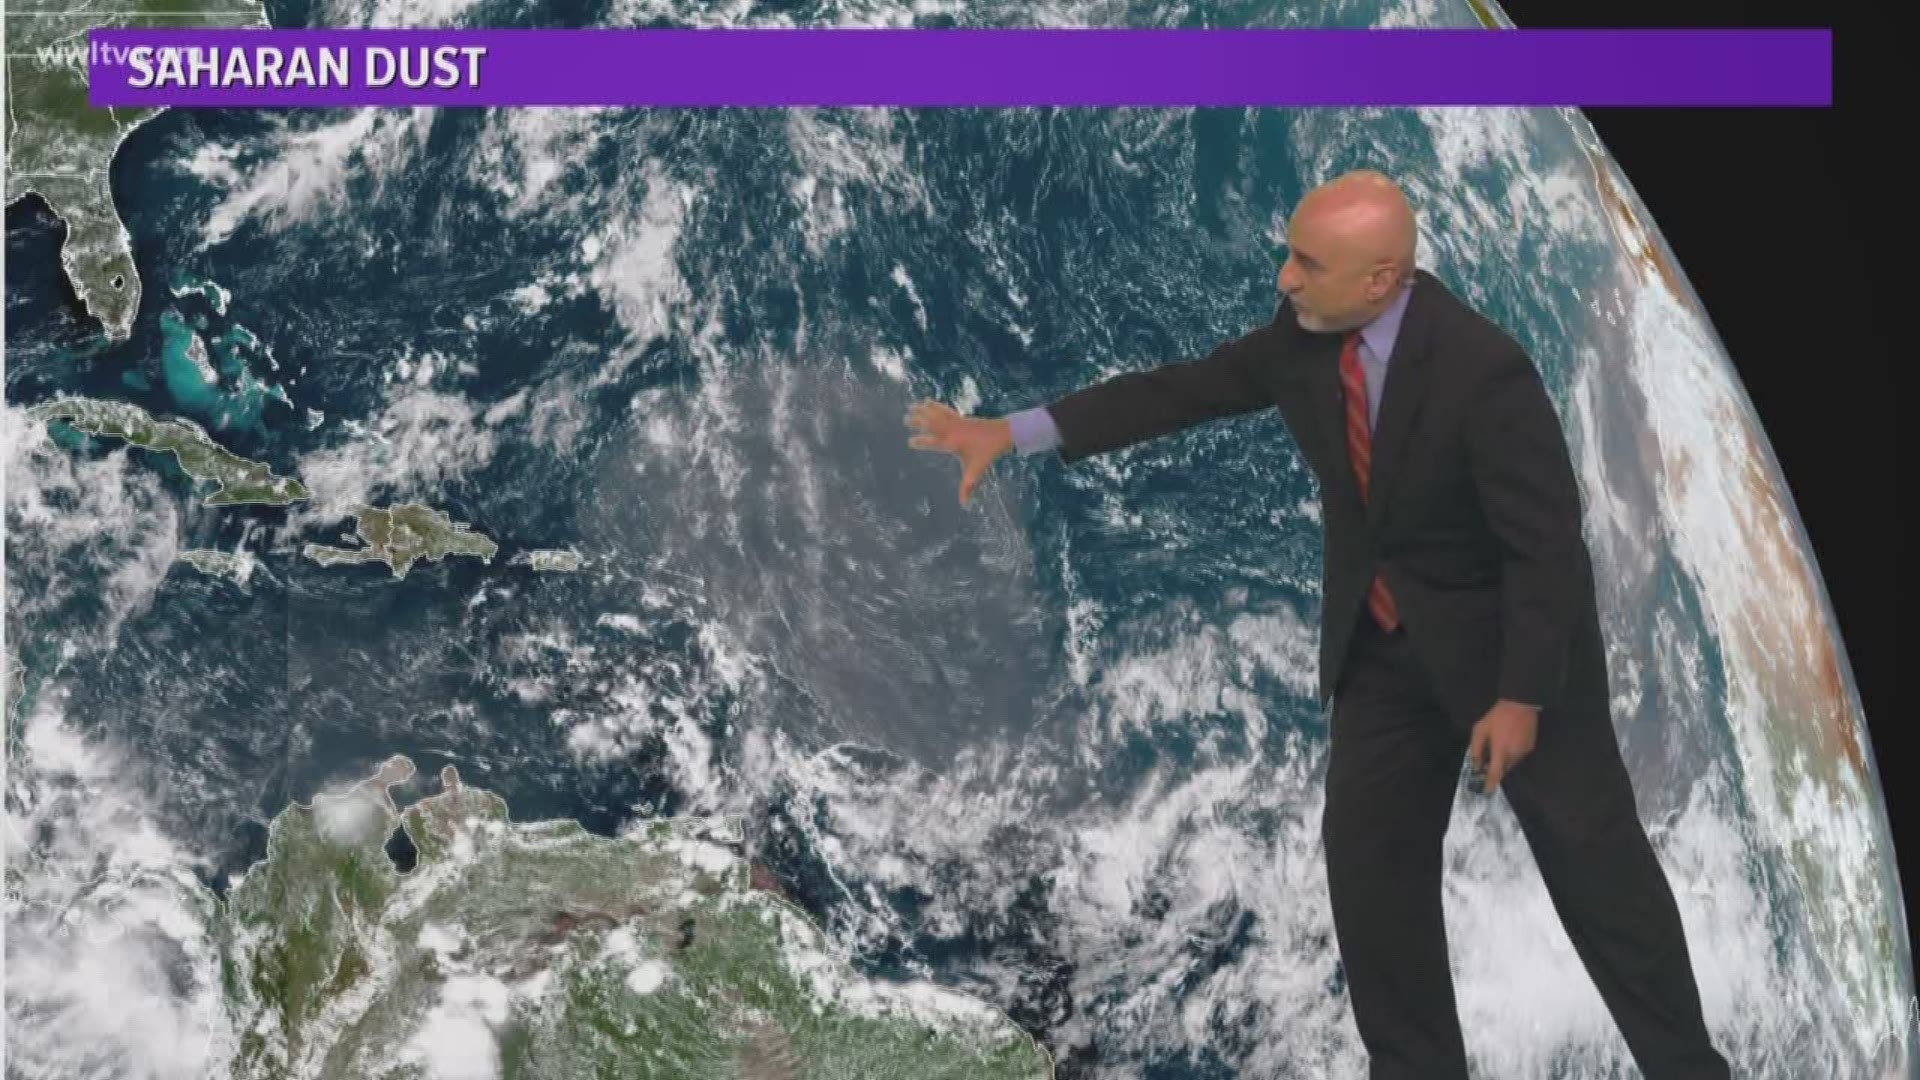 Chief Meteorologist Carl Arredondo and the 5pm Wednesday Tropical Update